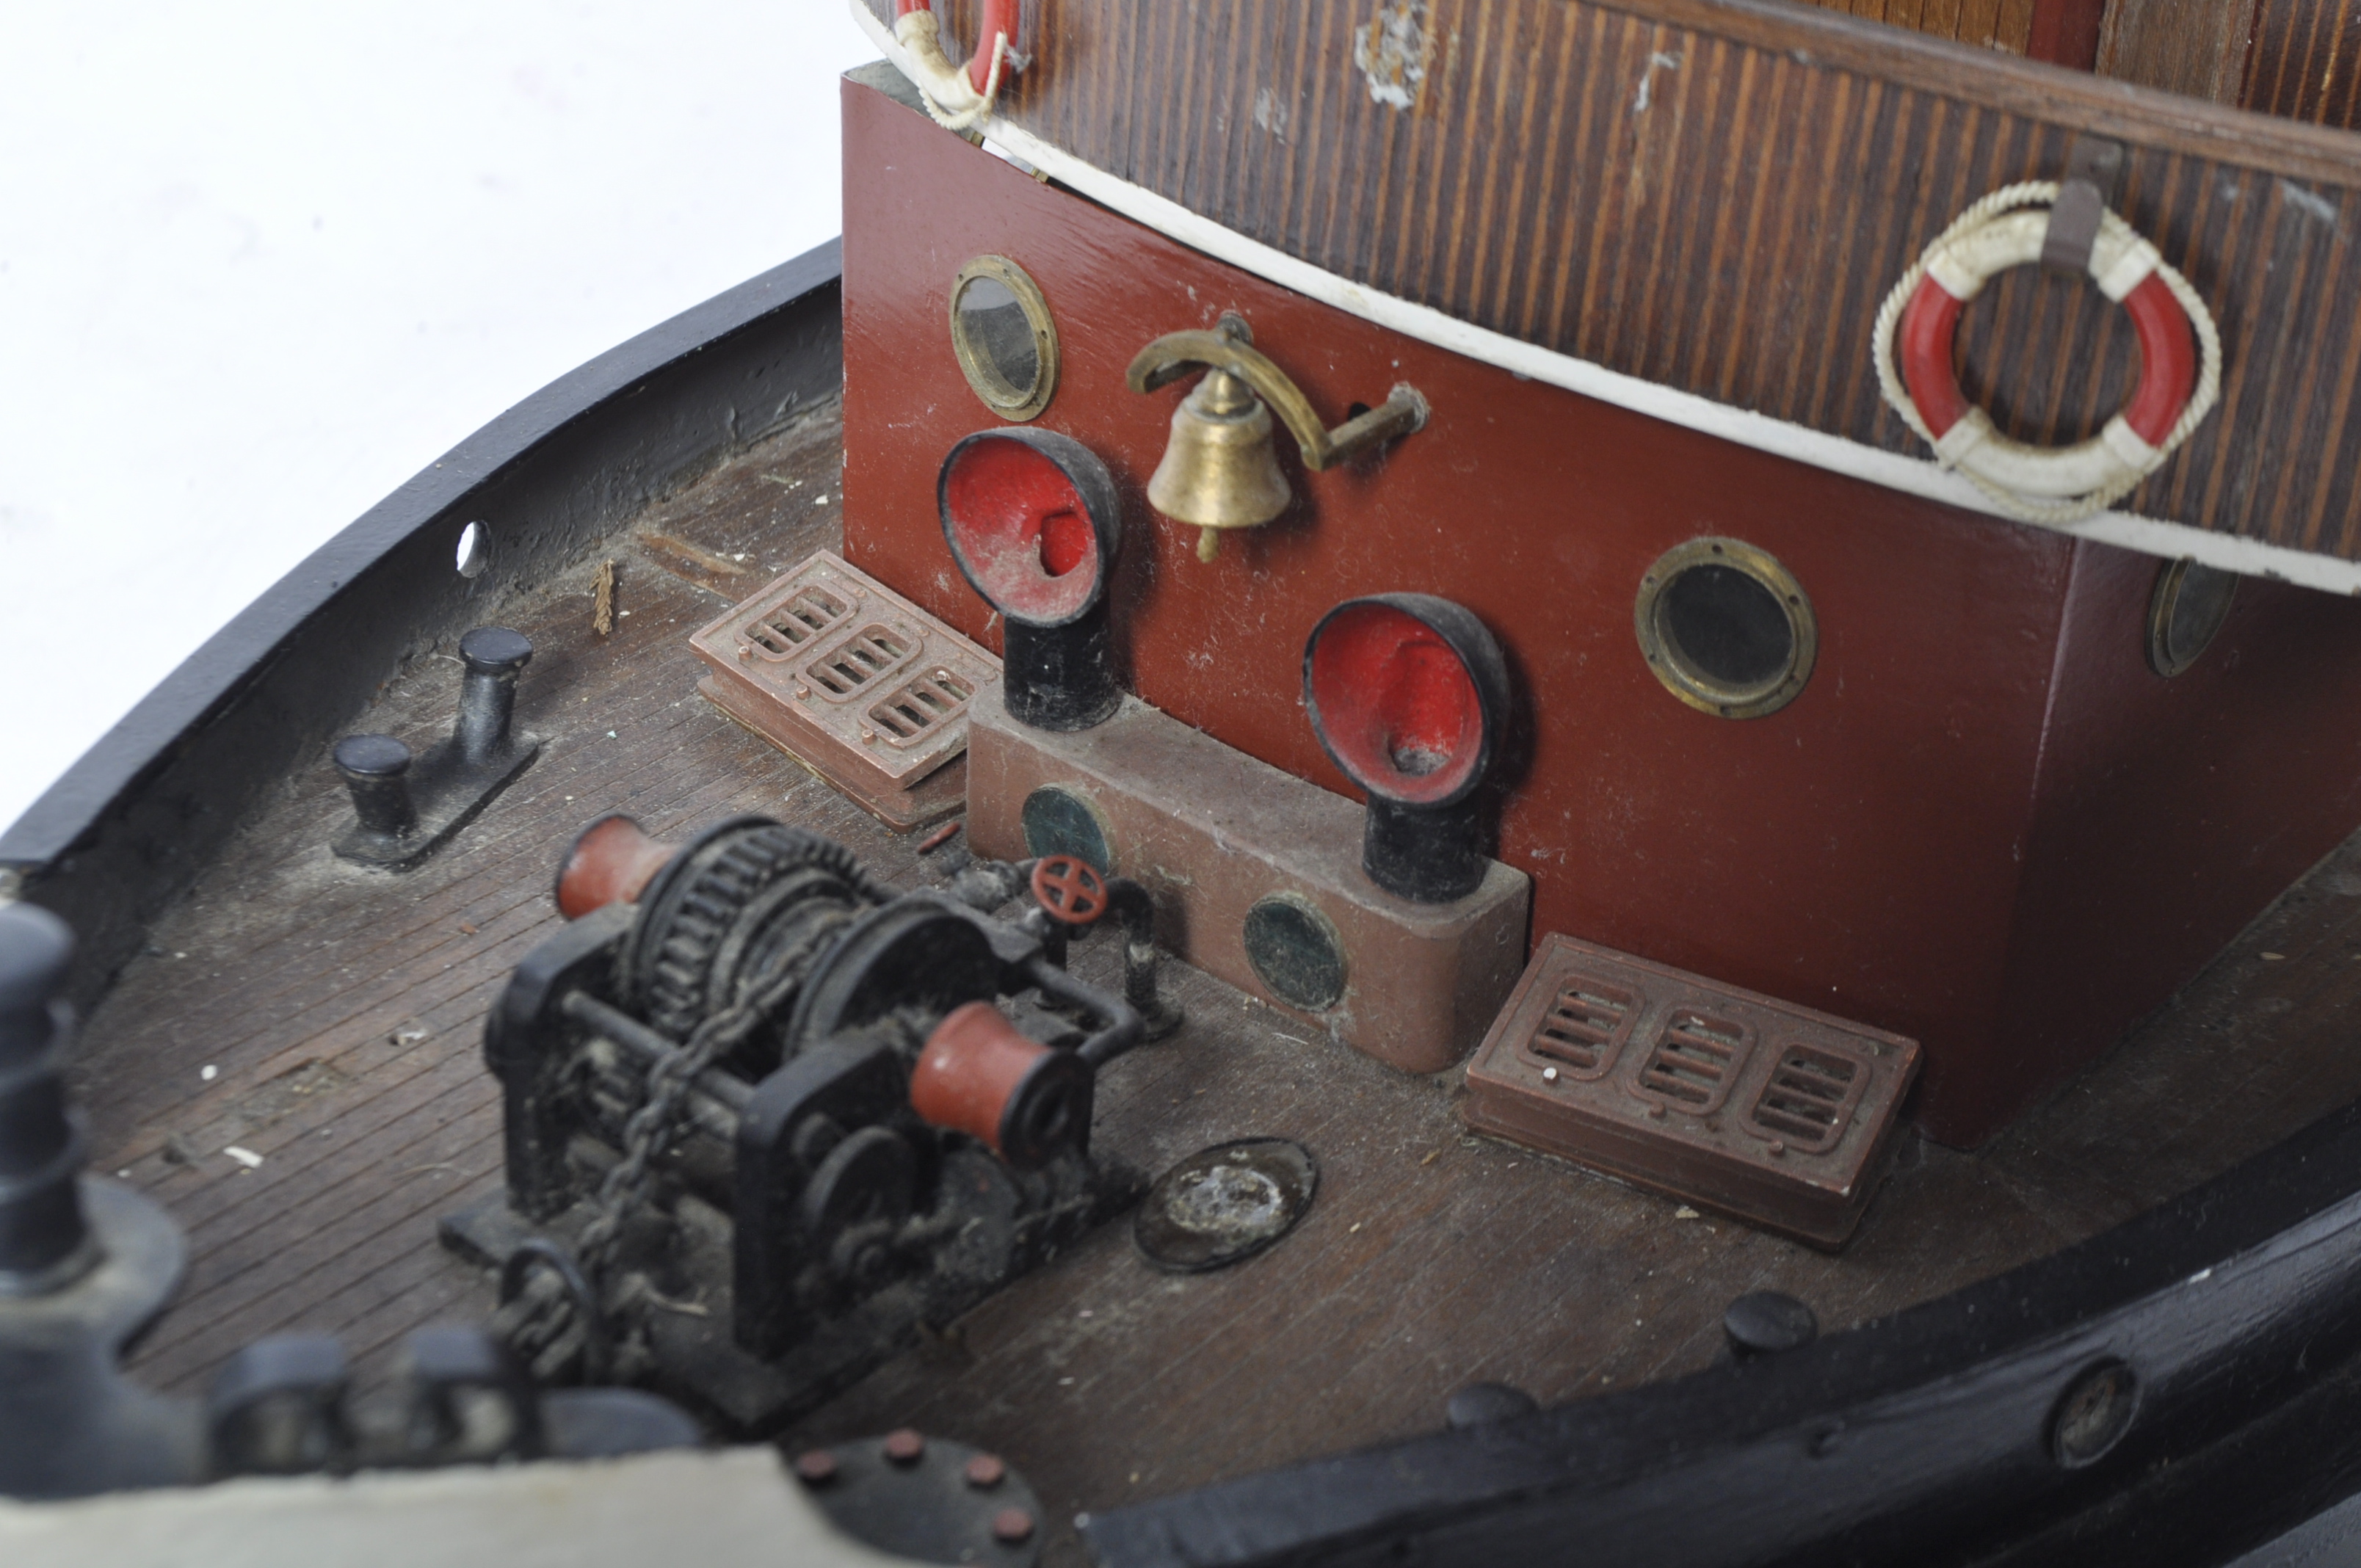 20TH CENTURY SCRATCH BUILT MODEL OF A 19TH CENTURY TUG BOAT - Image 3 of 7